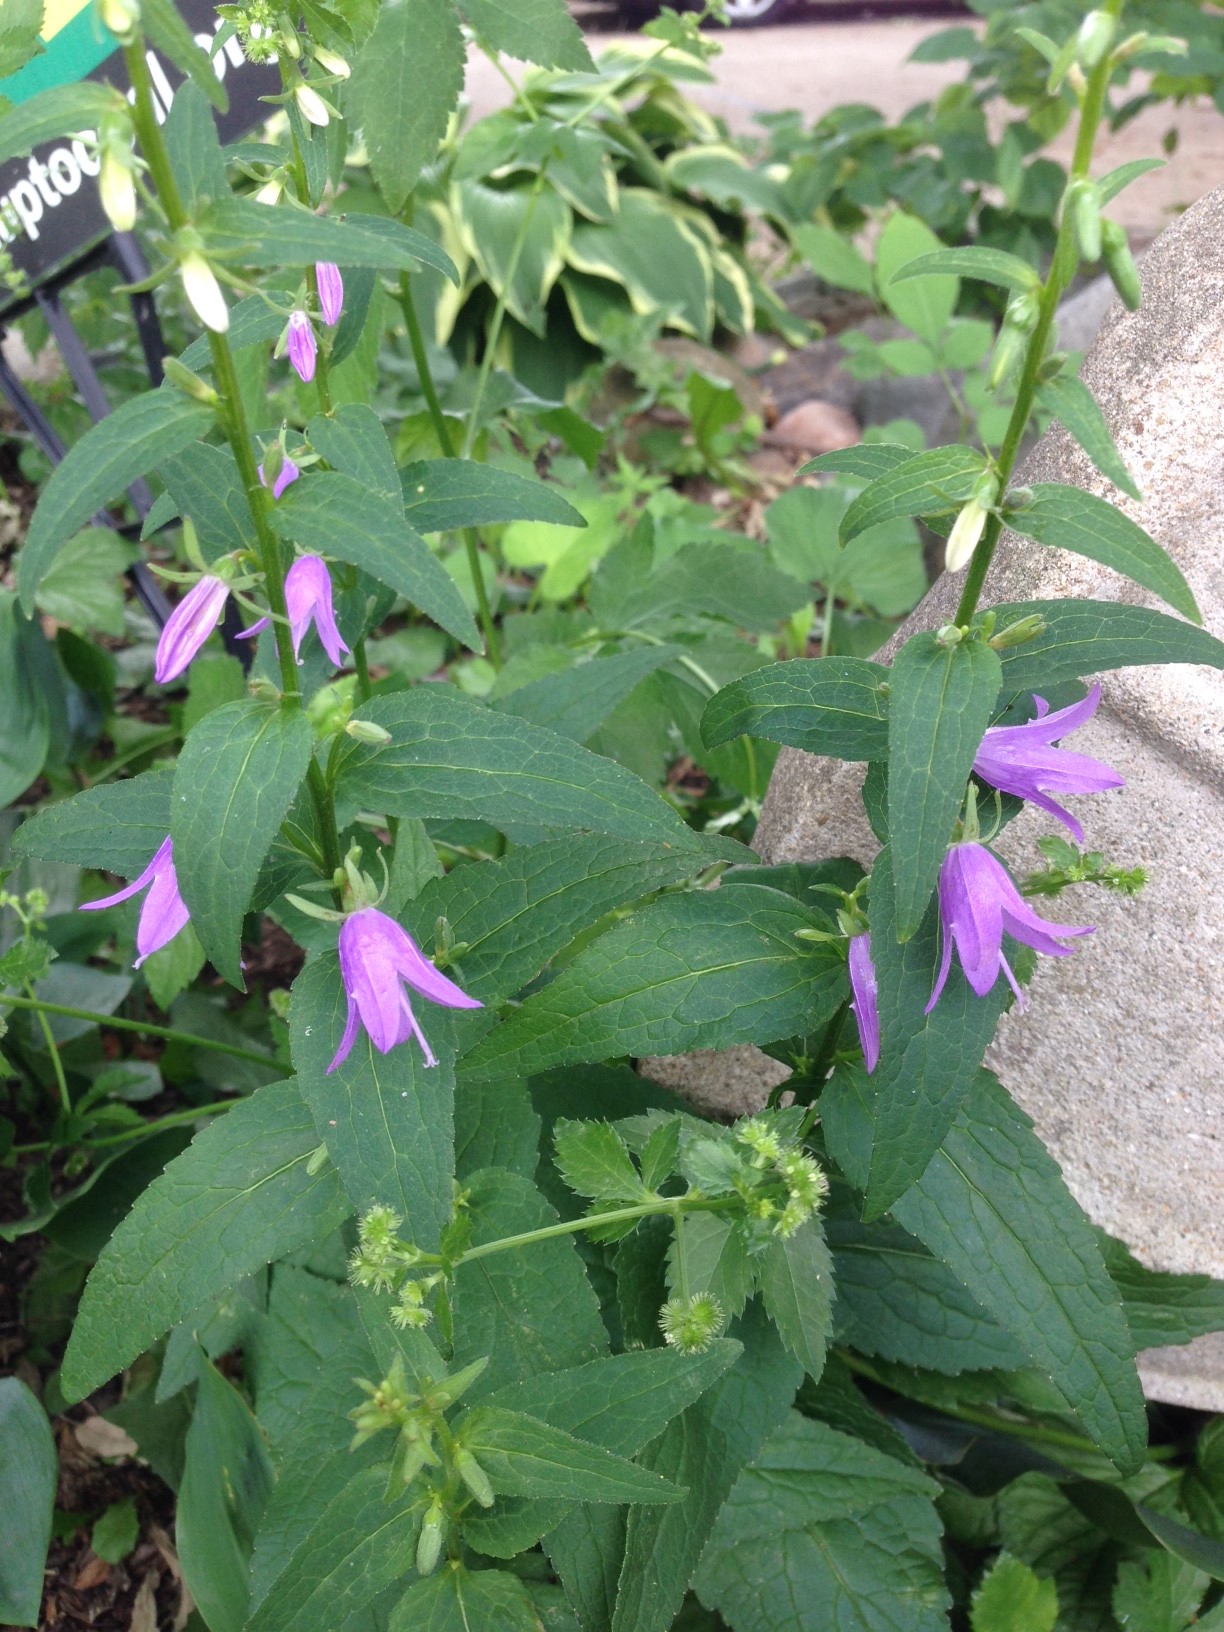 Identify terrible-horrible weed with pretty purple flowers? - Ask an ...